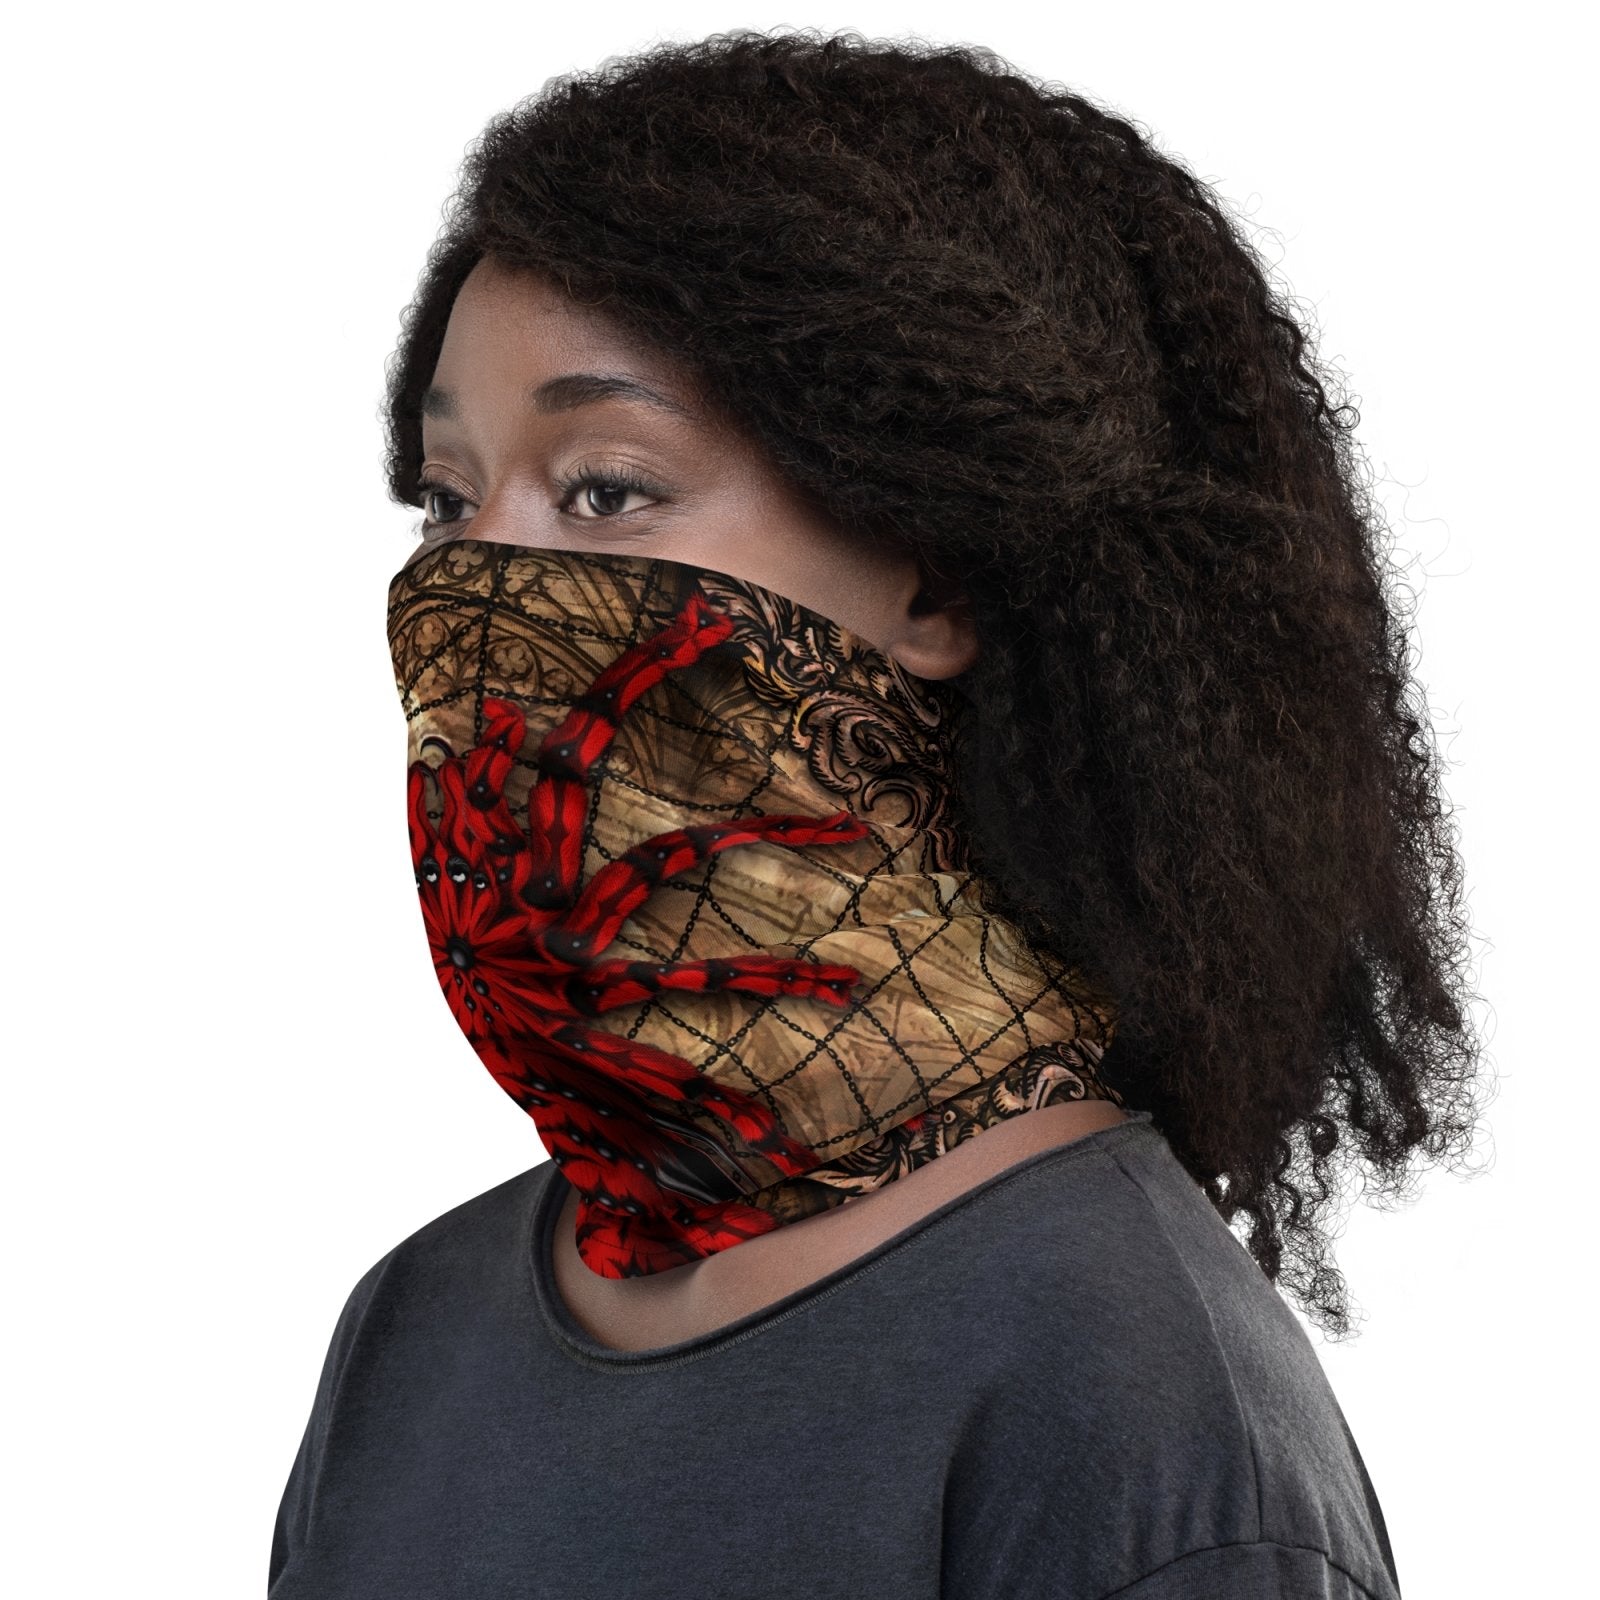 Gothic Neck Gaiter, Face Mask, Head Covering, Halloween Outfit, Tarantula Lover Gift - Goth Horror, Red Spider, Beige - Abysm Internal